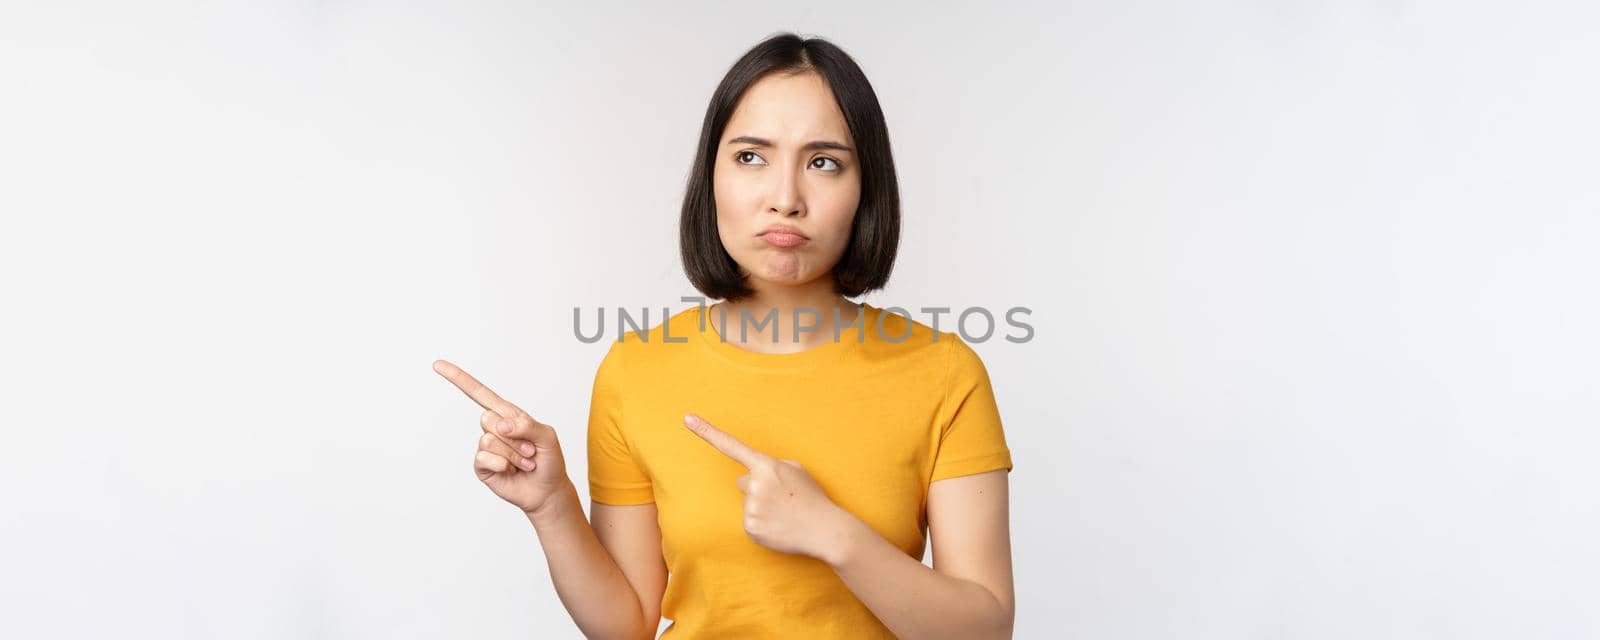 Upset grumpy asian girl, pouting and looking at smth unfair, pointing fingers left at banner, logo brand, standing in yellow tshirt over white background.